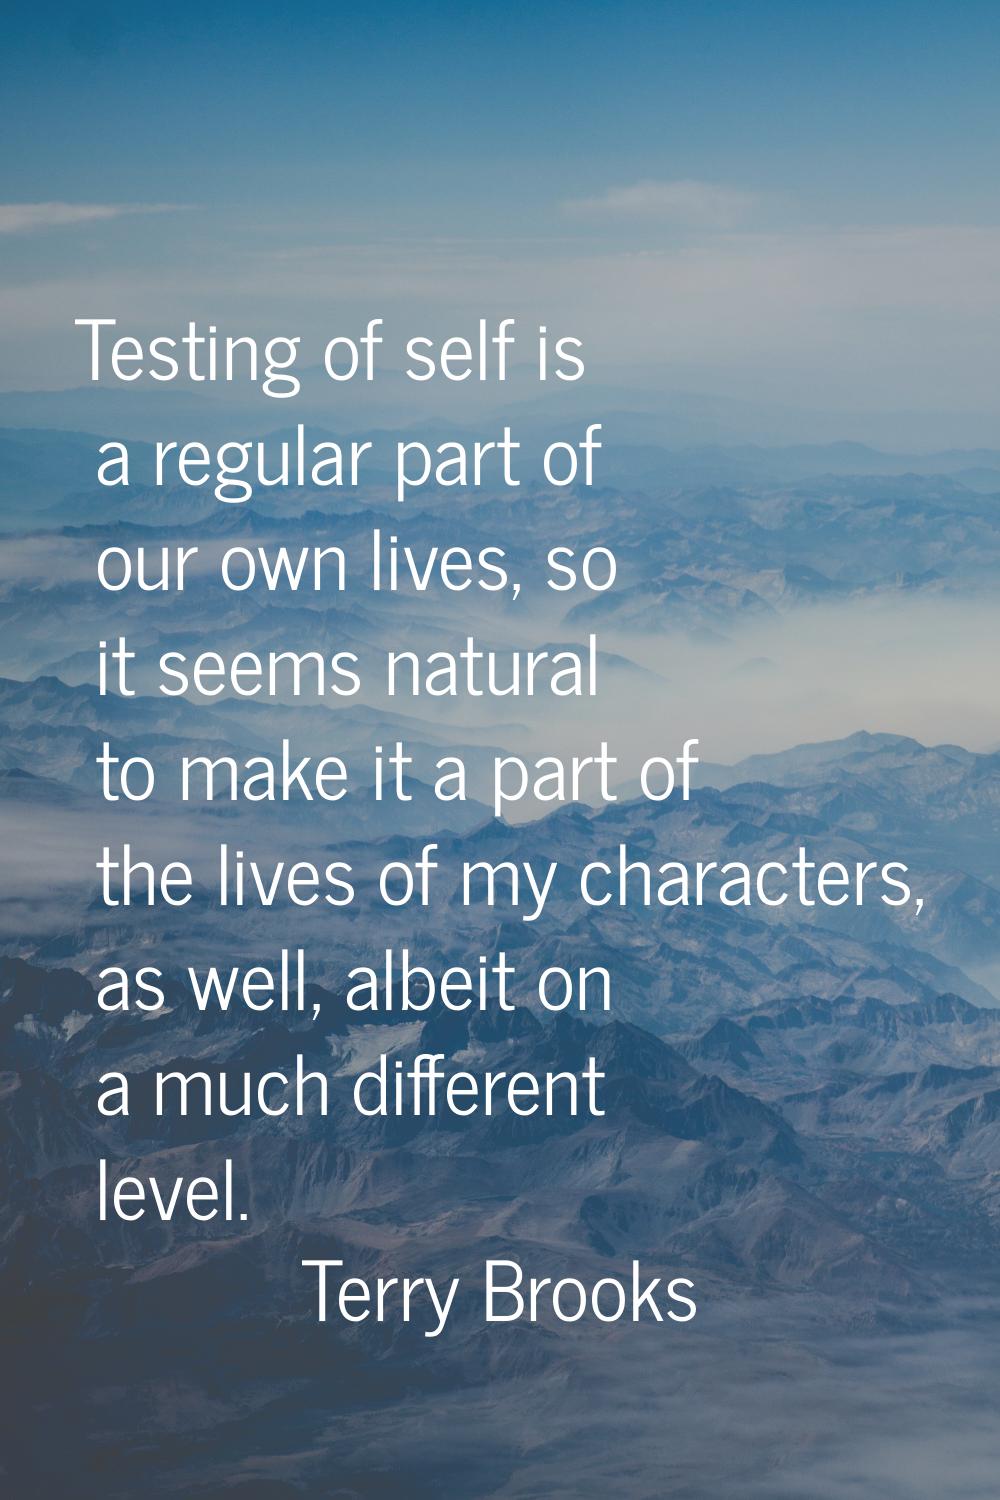 Testing of self is a regular part of our own lives, so it seems natural to make it a part of the li